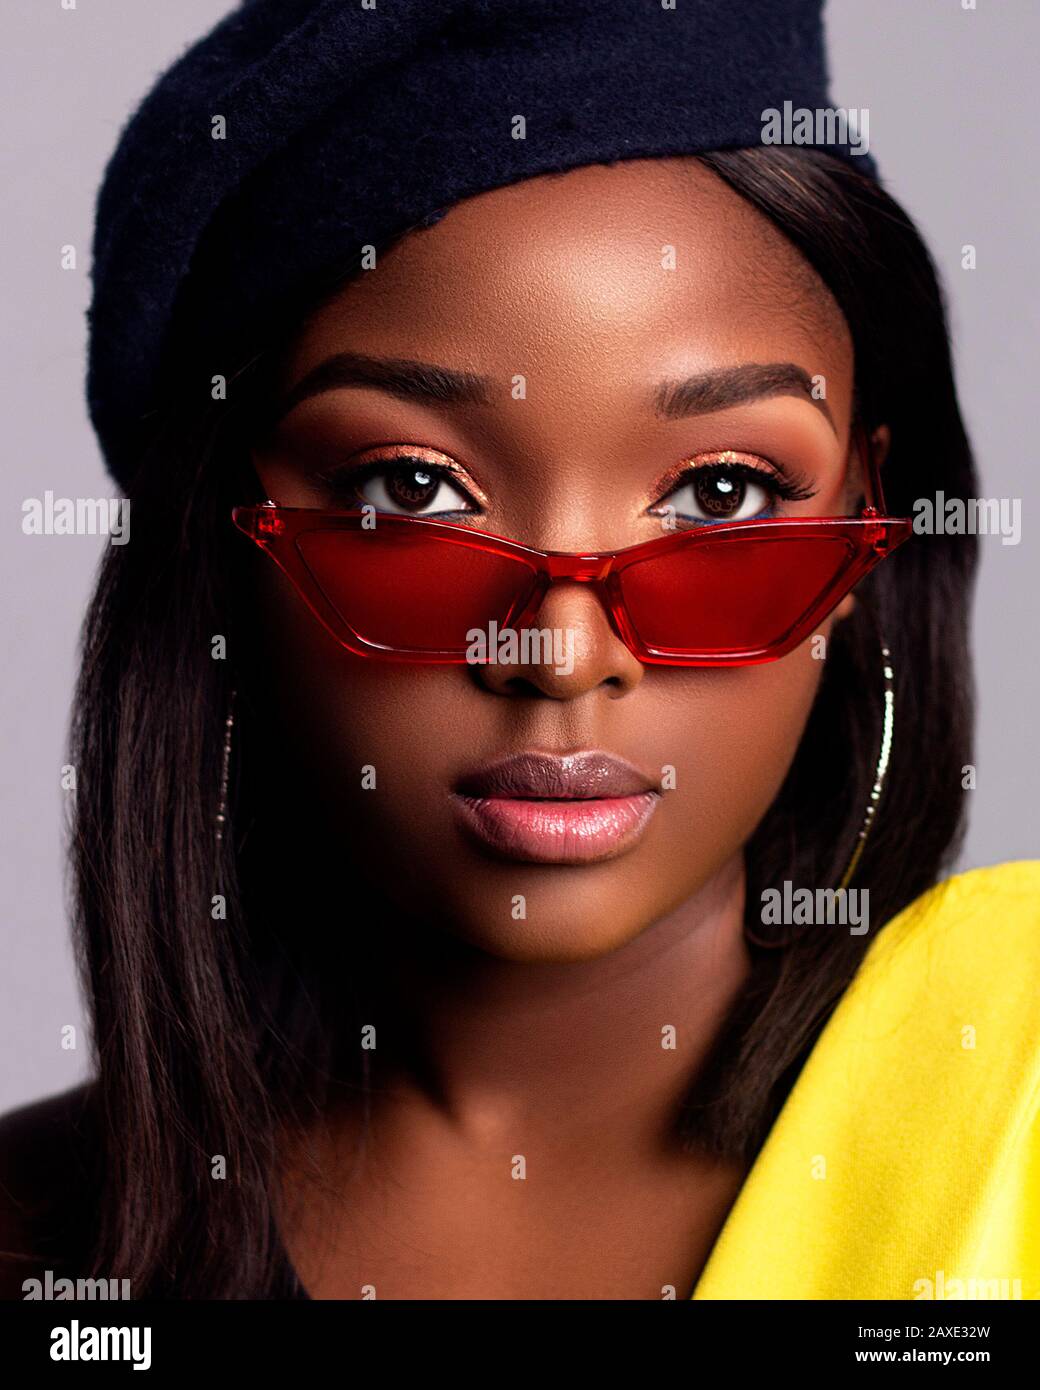 Close up portrait of young beautiful African lady wearing glasses on a grey background with a hat Stock Photo